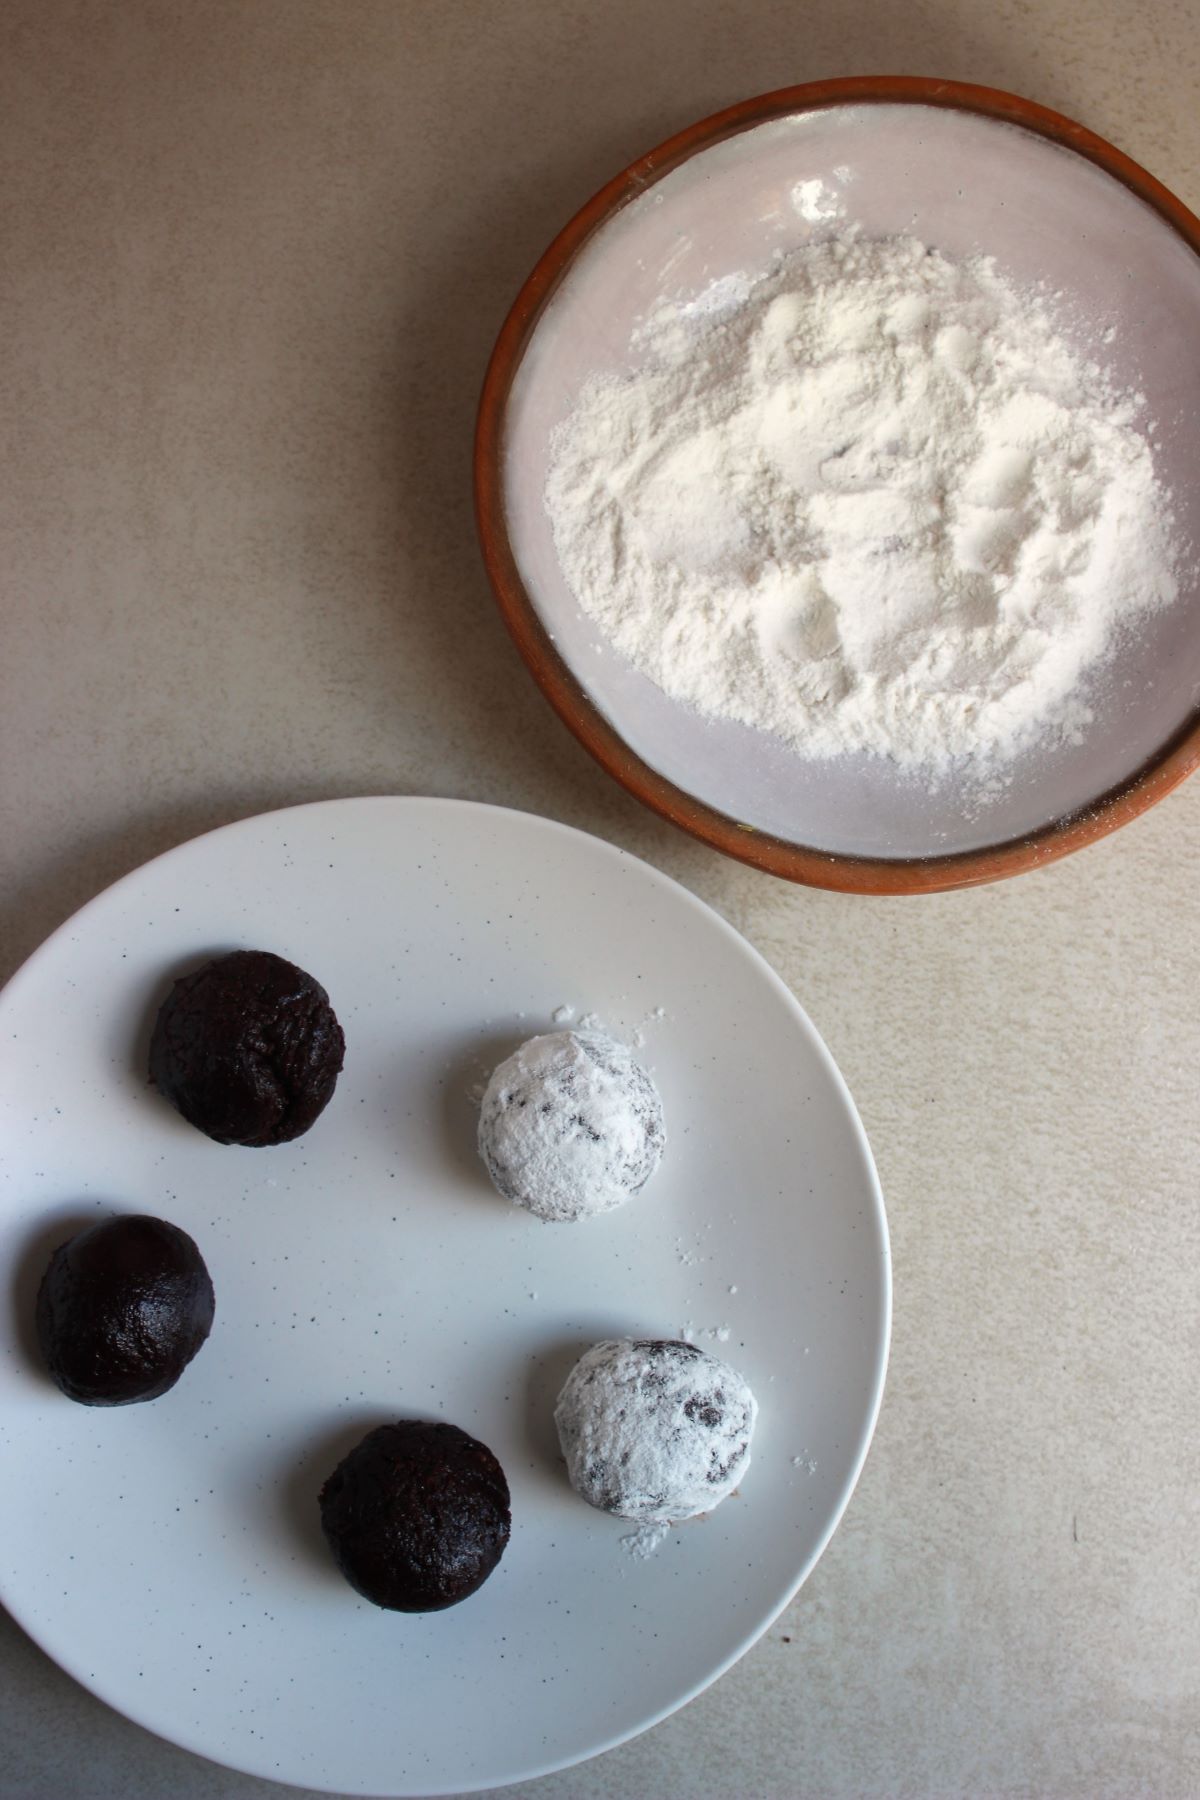 Plate with cookie dough balls, two covered with sugar powdered. Another plate with powdered sugar.